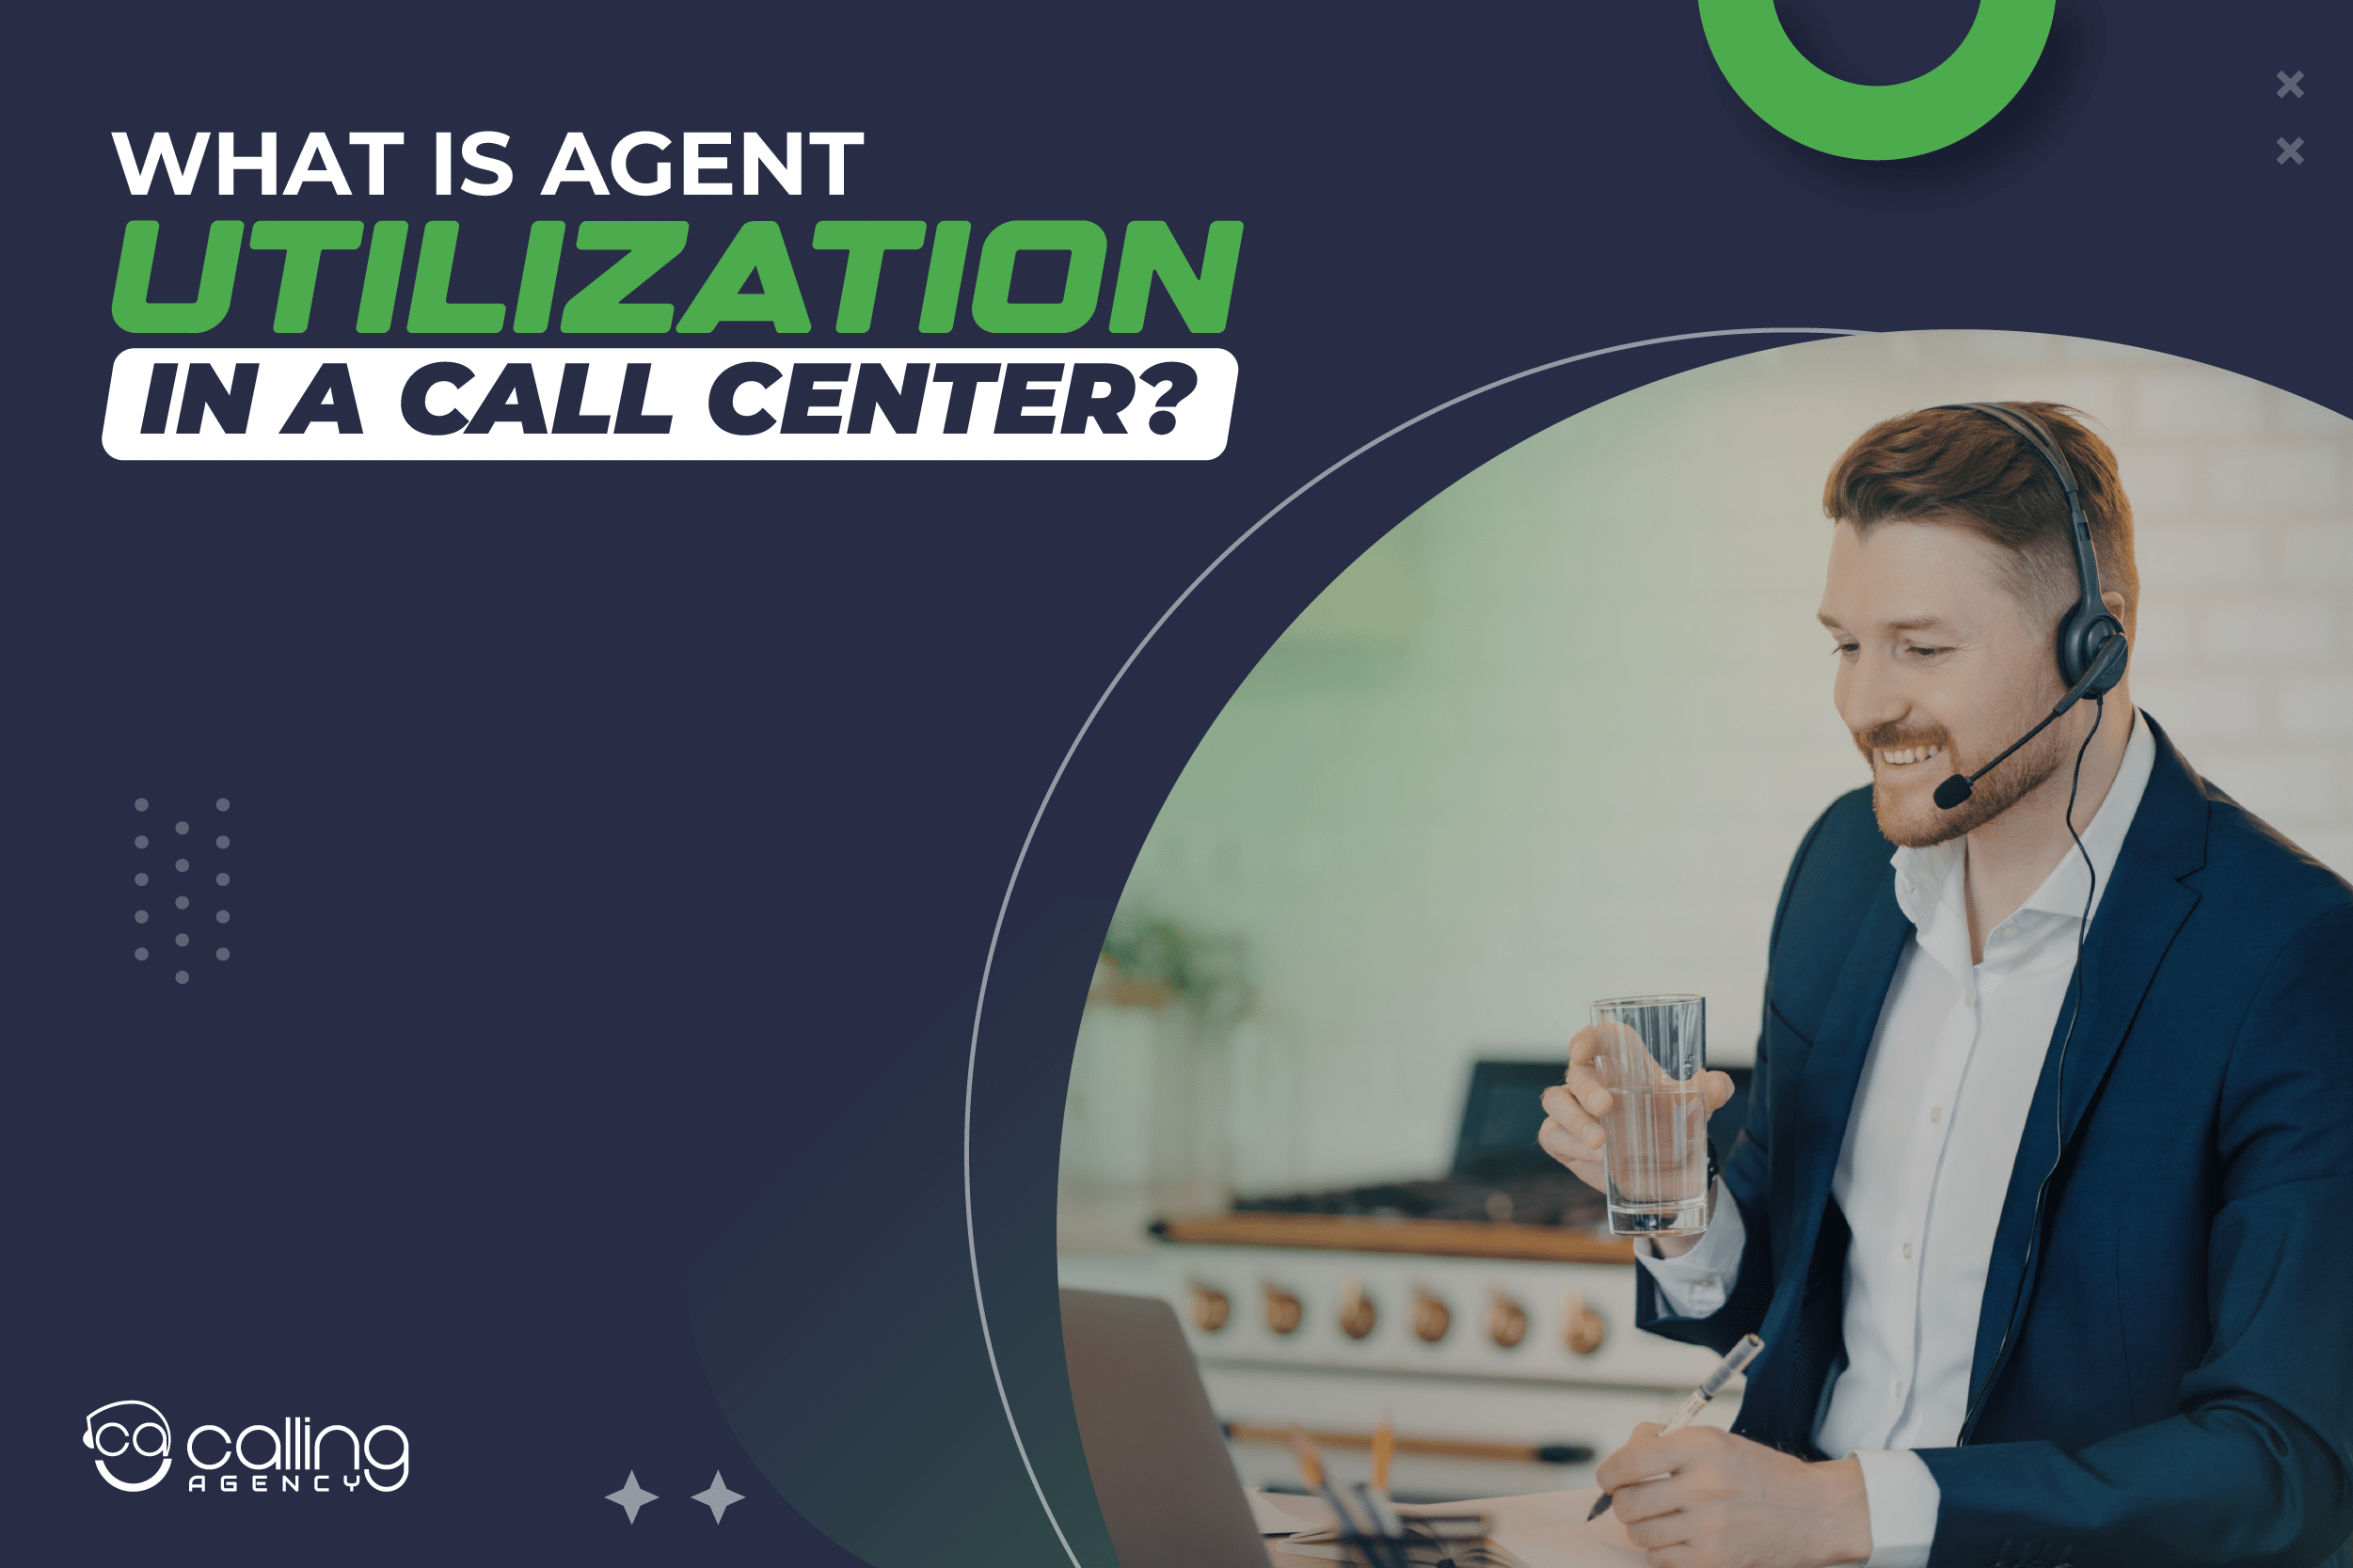 What Is Agent Utilization In A Call Center?